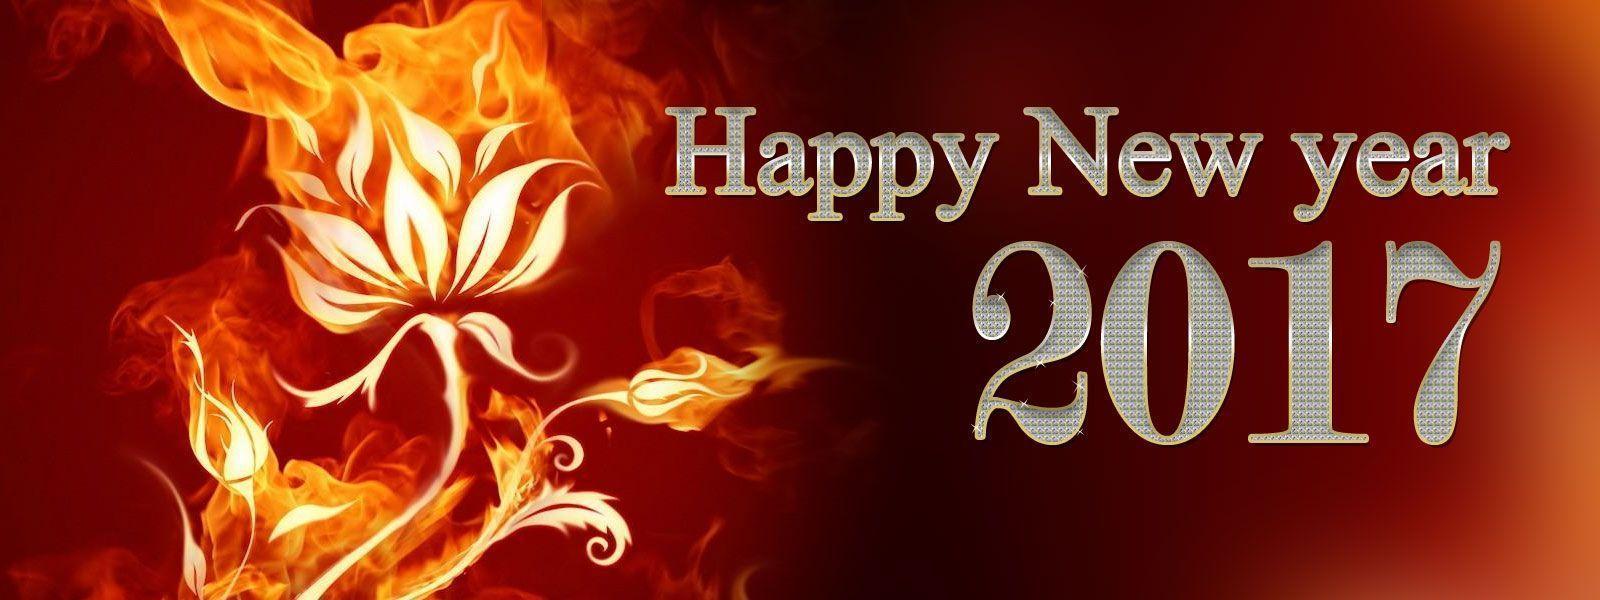 Happy New Year HD Wallpaper and Image 2017 Free Downlaod